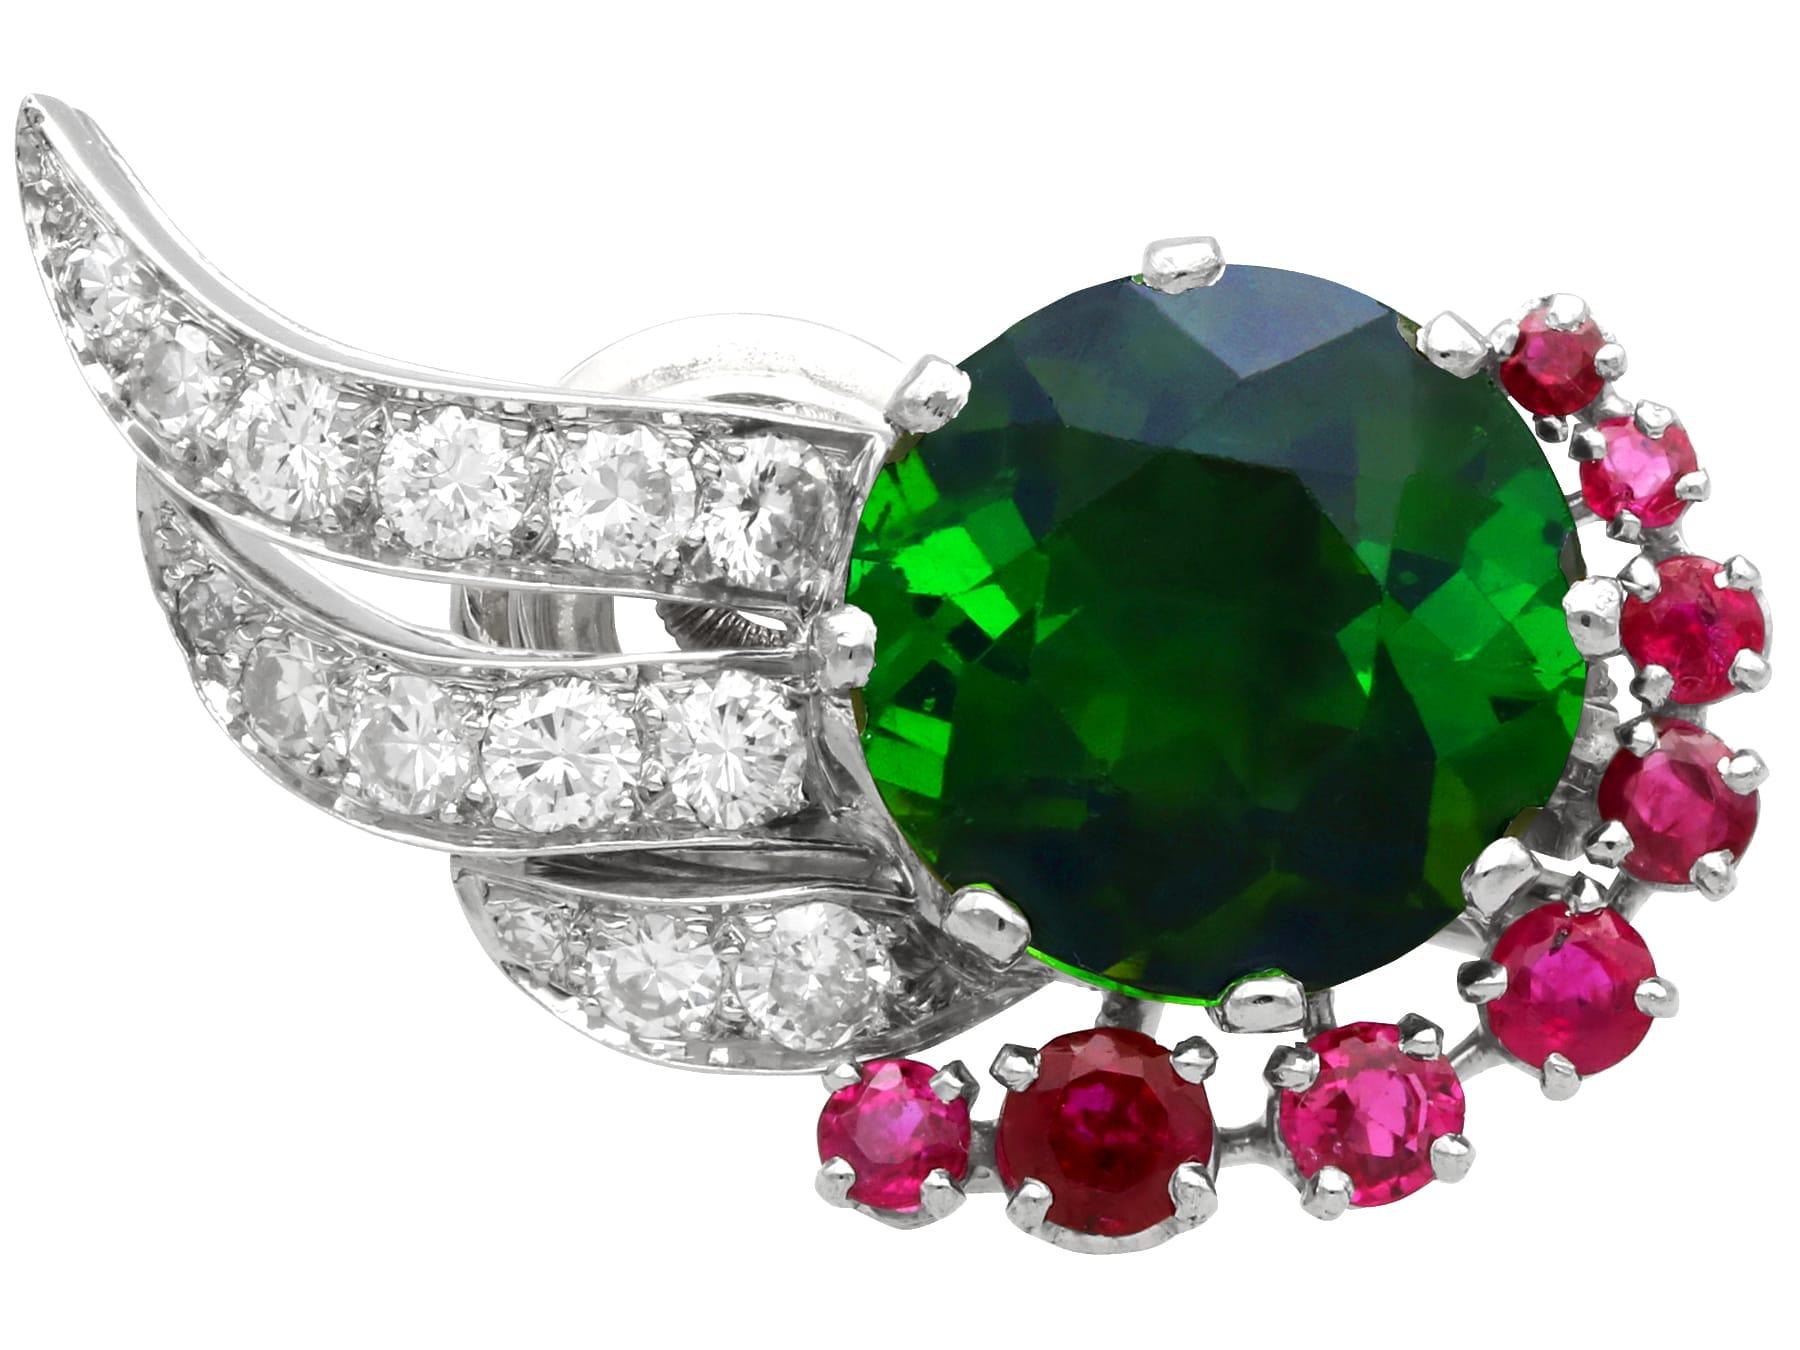 A stunning, fine and impressive pair of vintage 10.20 carat green tourmaline, 0.75 carat ruby and 1.84 carat diamond, 18k white gold earrings; part of our diverse antique jewellery and estate jewelry collections.

These stunning, fine and impressive